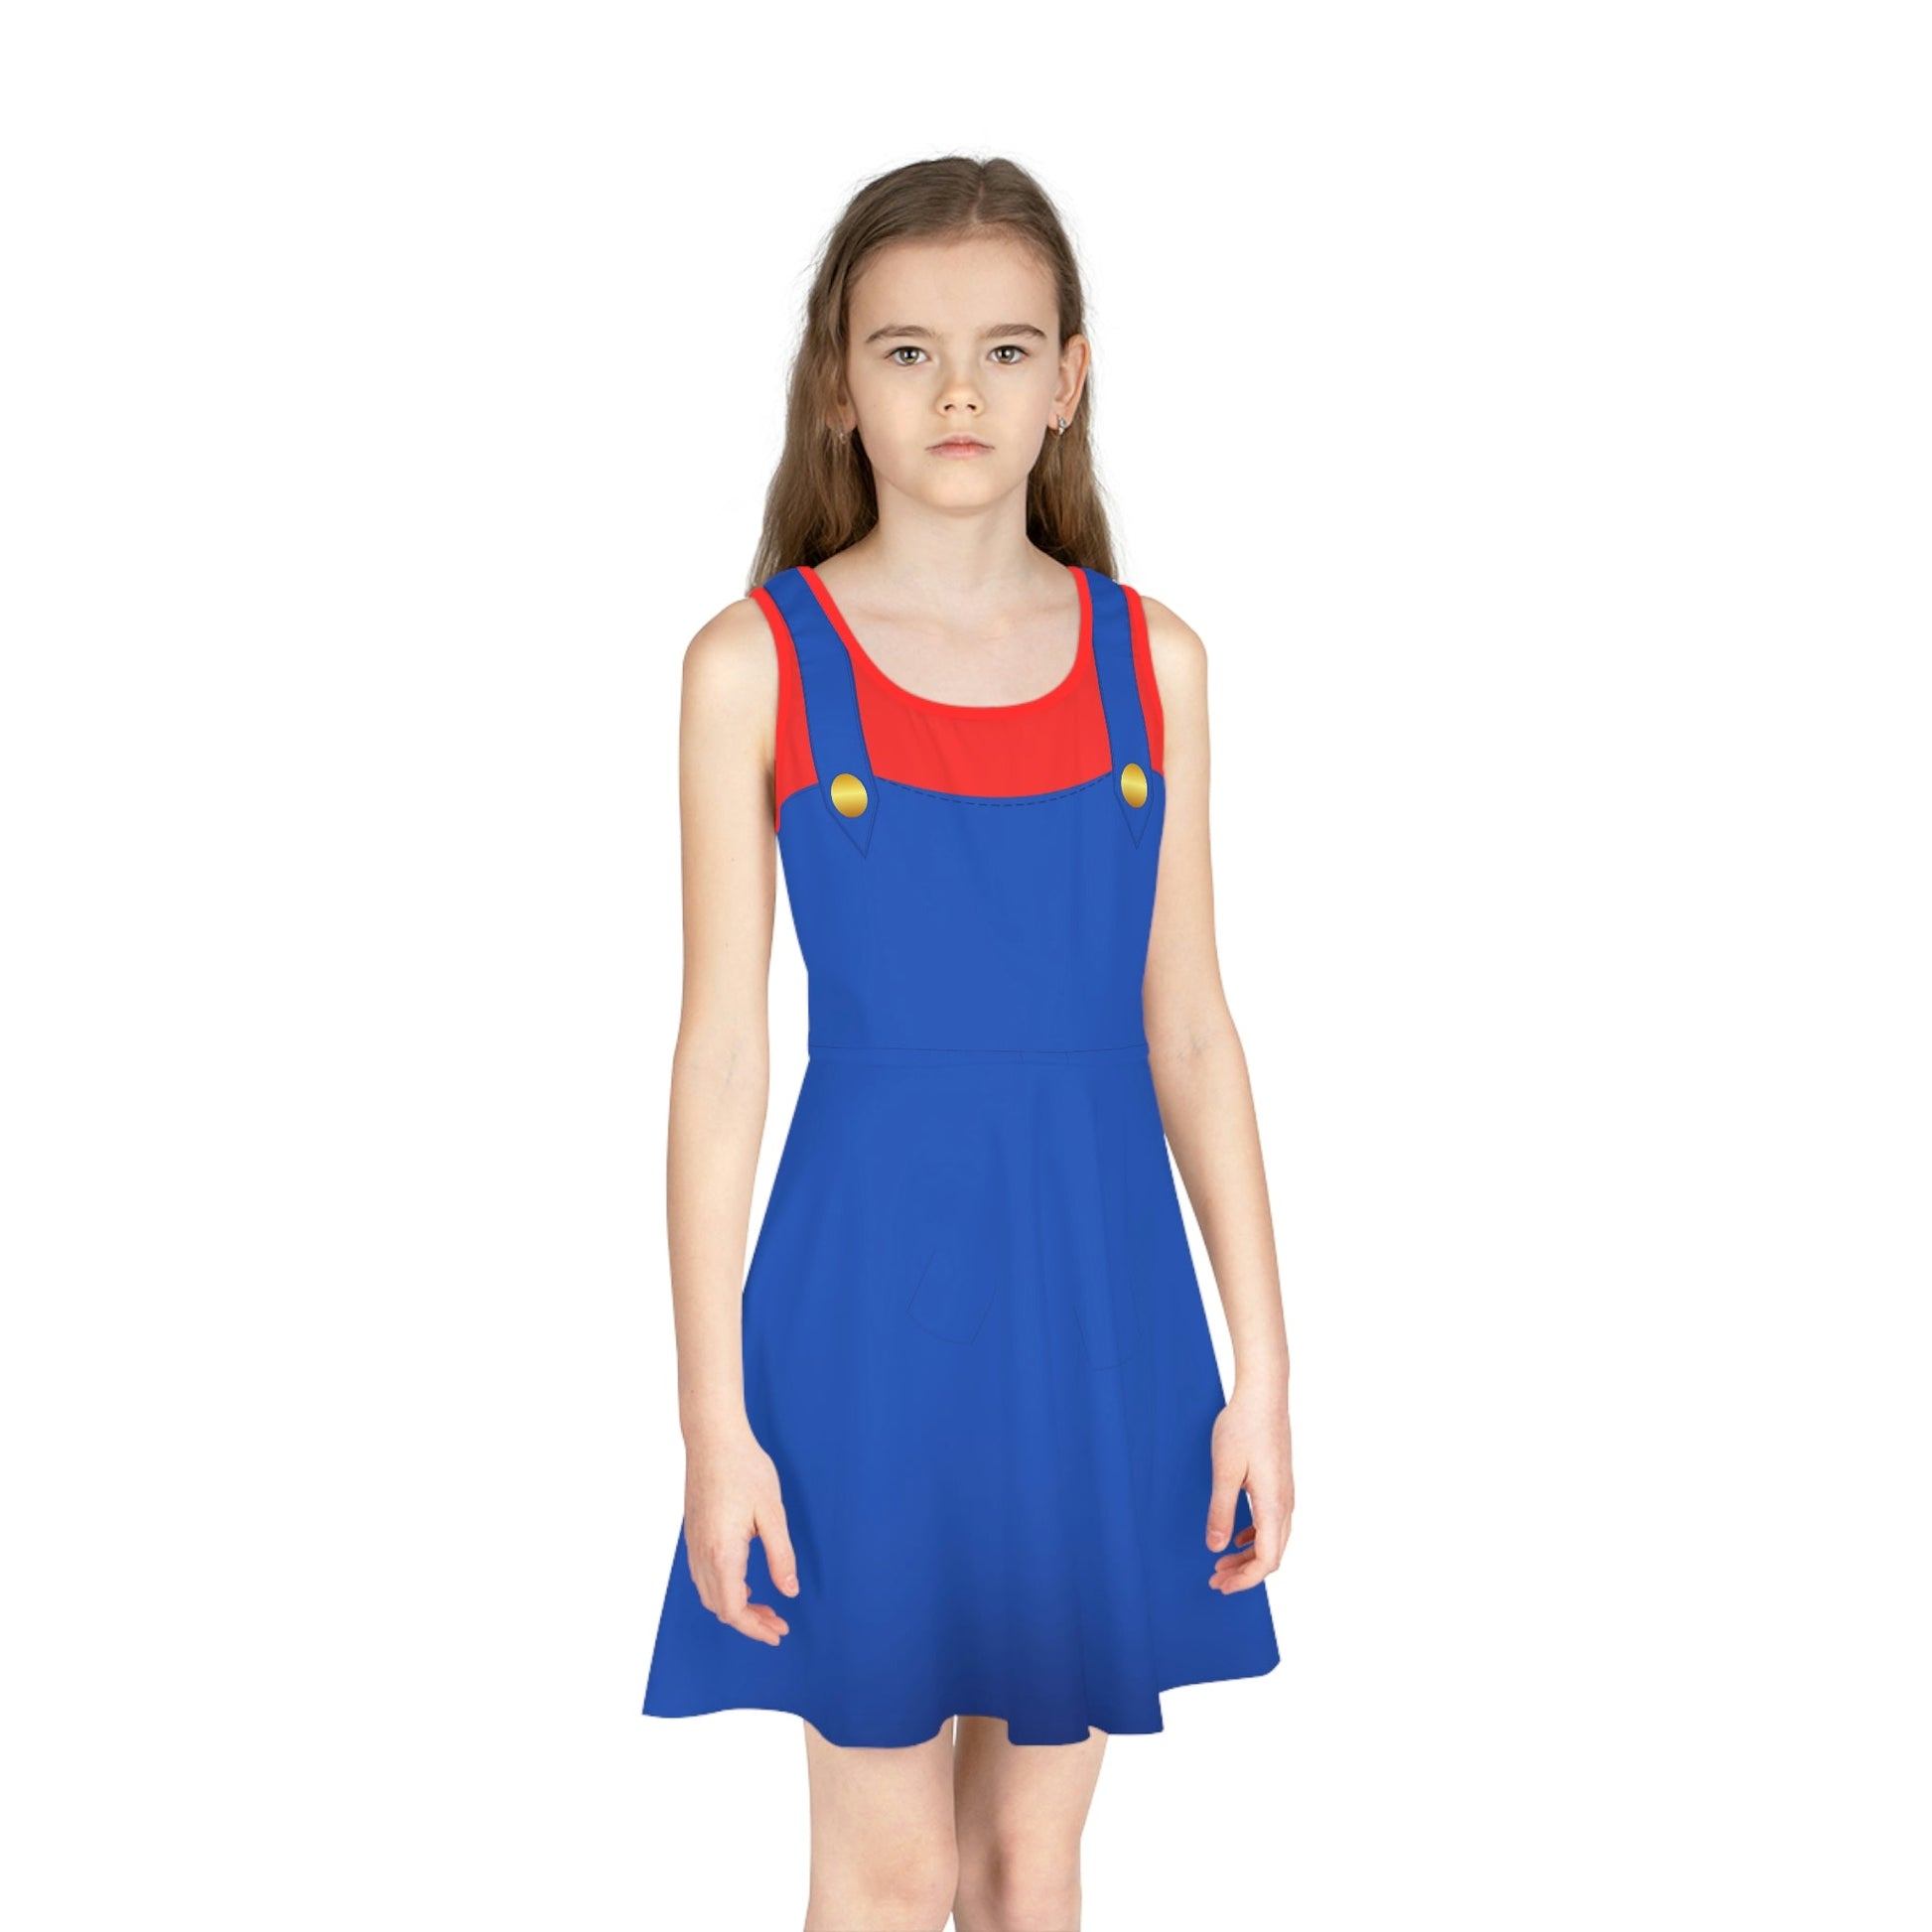 Red Video Game Guy Girls' Sleeveless Sundress All Over PrintAOPAOP Clothing#tag4##tag5##tag6#